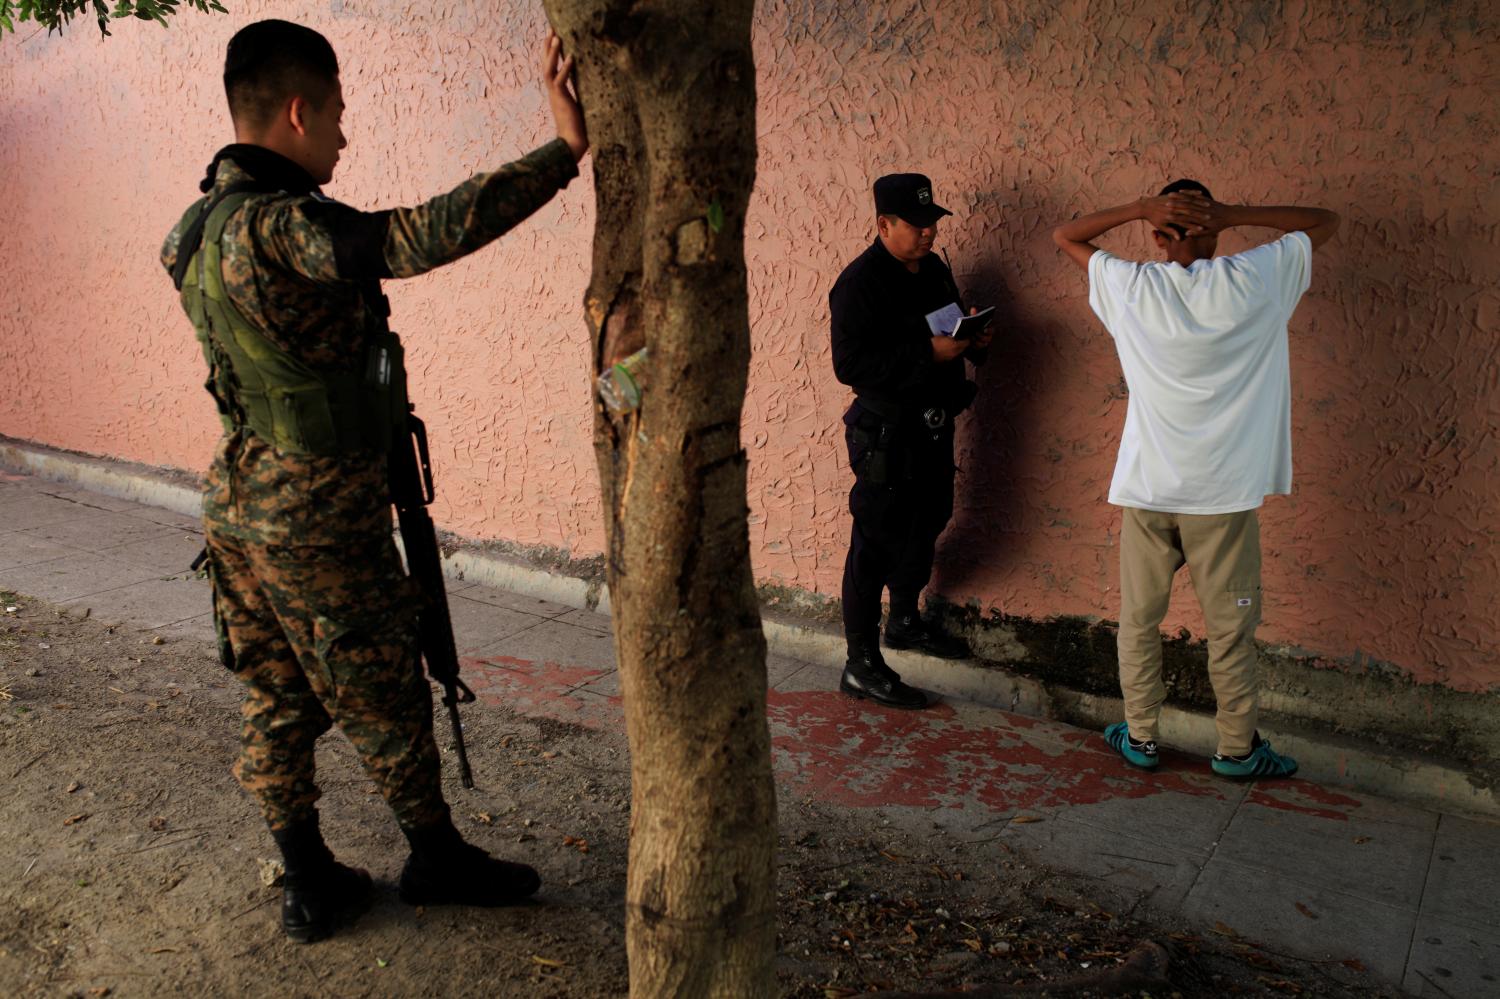 A policeman interrogates a suspected gang member prior to a ceremony to declare their communities a peace zone at La Selva neighborhood in Ilopango, El Salvador, February 3, 2017. The man was later released. Inhabitants of southern Ilopango declared their neighborhoods as violence-free zones to lower homicide rates in one of the most violent areas of El Salvador. REUTERS/Jose Cabezas - RTX2ZJRF